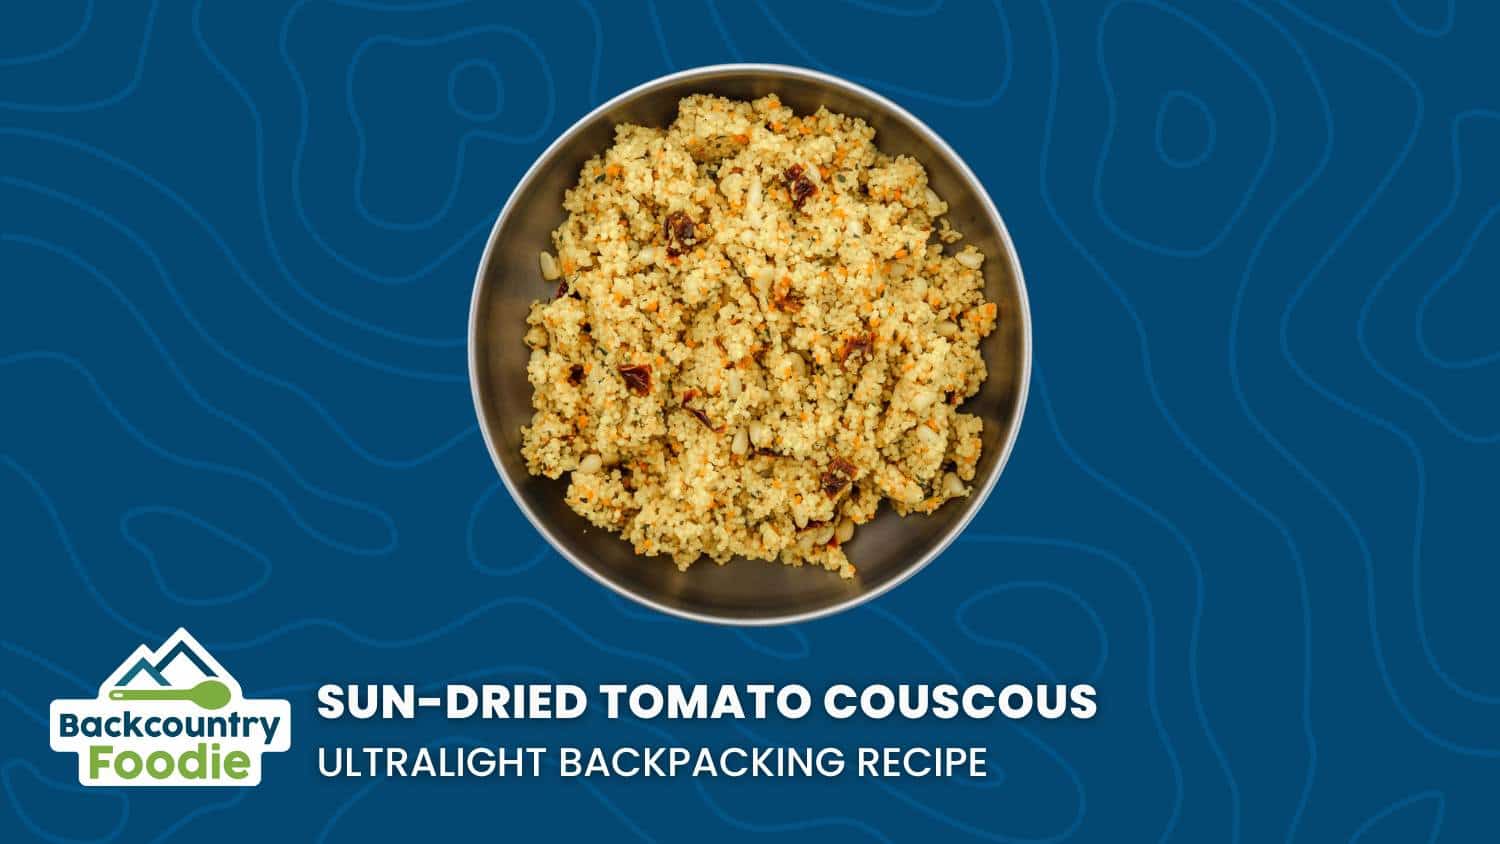 Backcountry Foodie Sun Dried Tomato Couscous DIY ultralight Backpacking Recipe thumbnail image